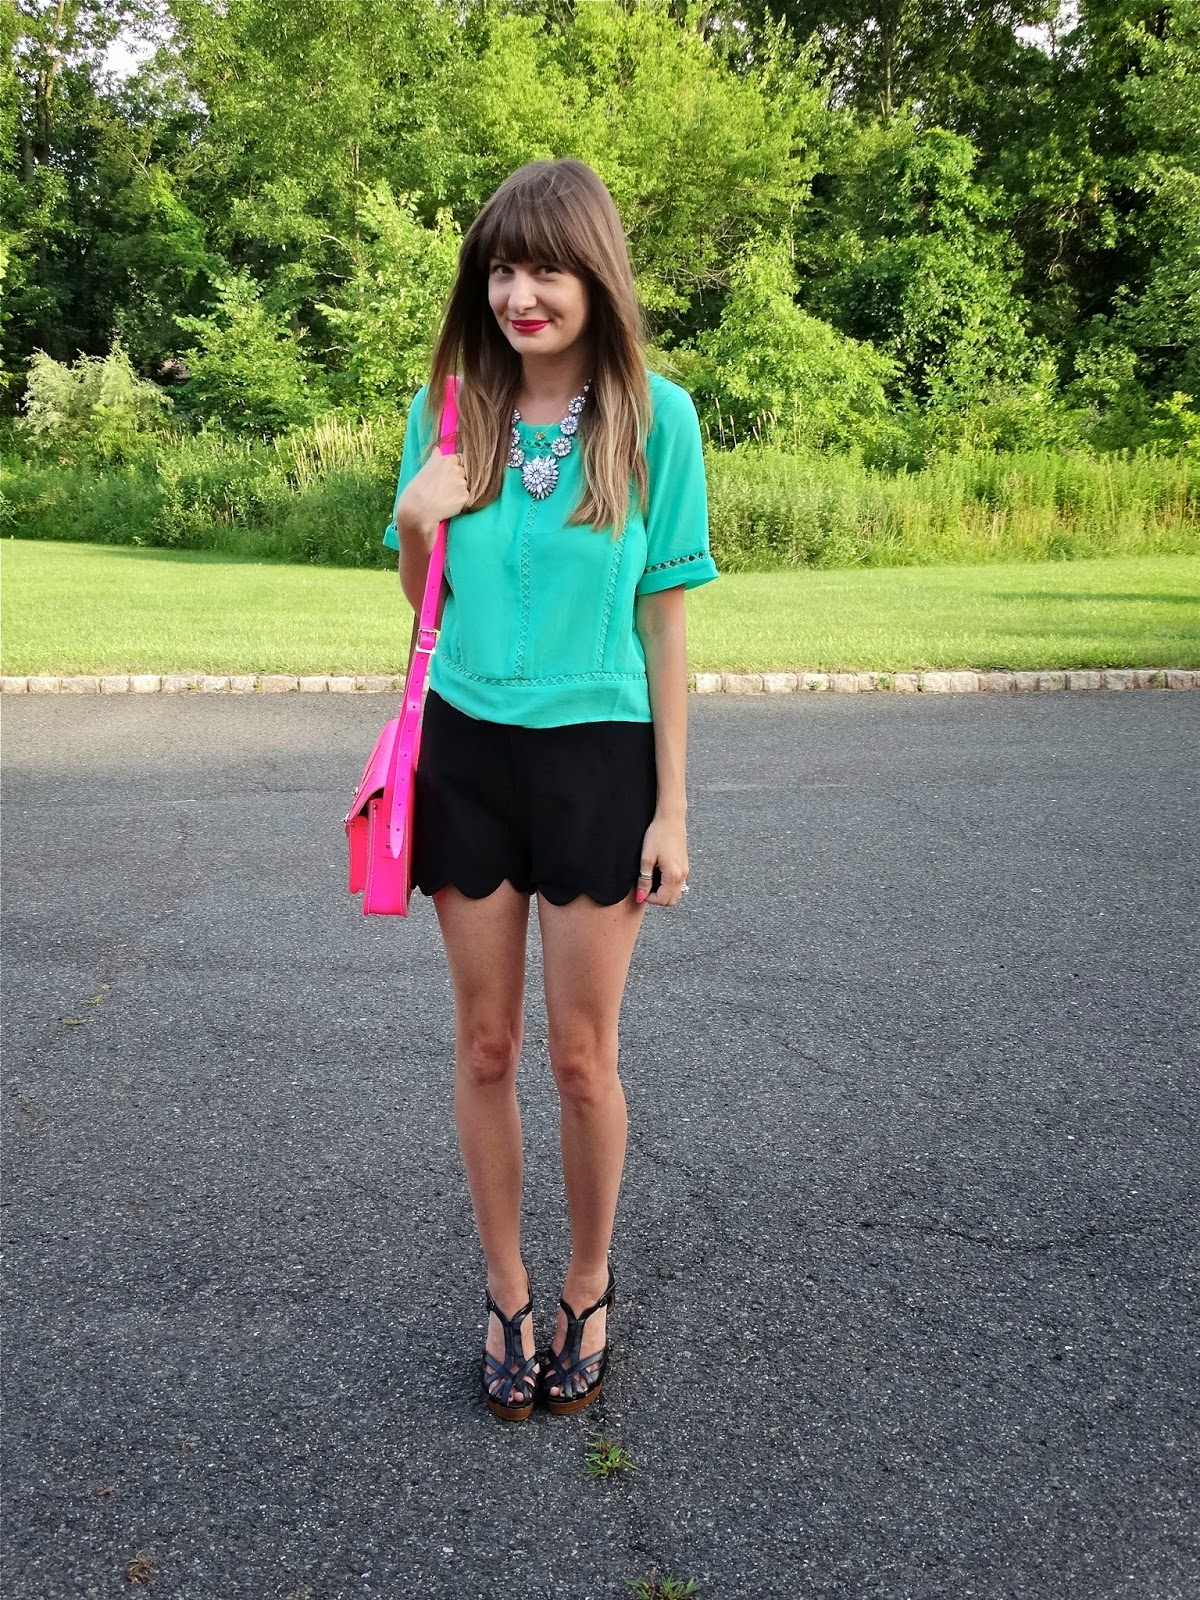 Jen of House Of Jeffers, wearing Scalloped Shorts from TJ Maxx, Crop Top from Francesca's, Cambridge Satchel and Nine West Wedges